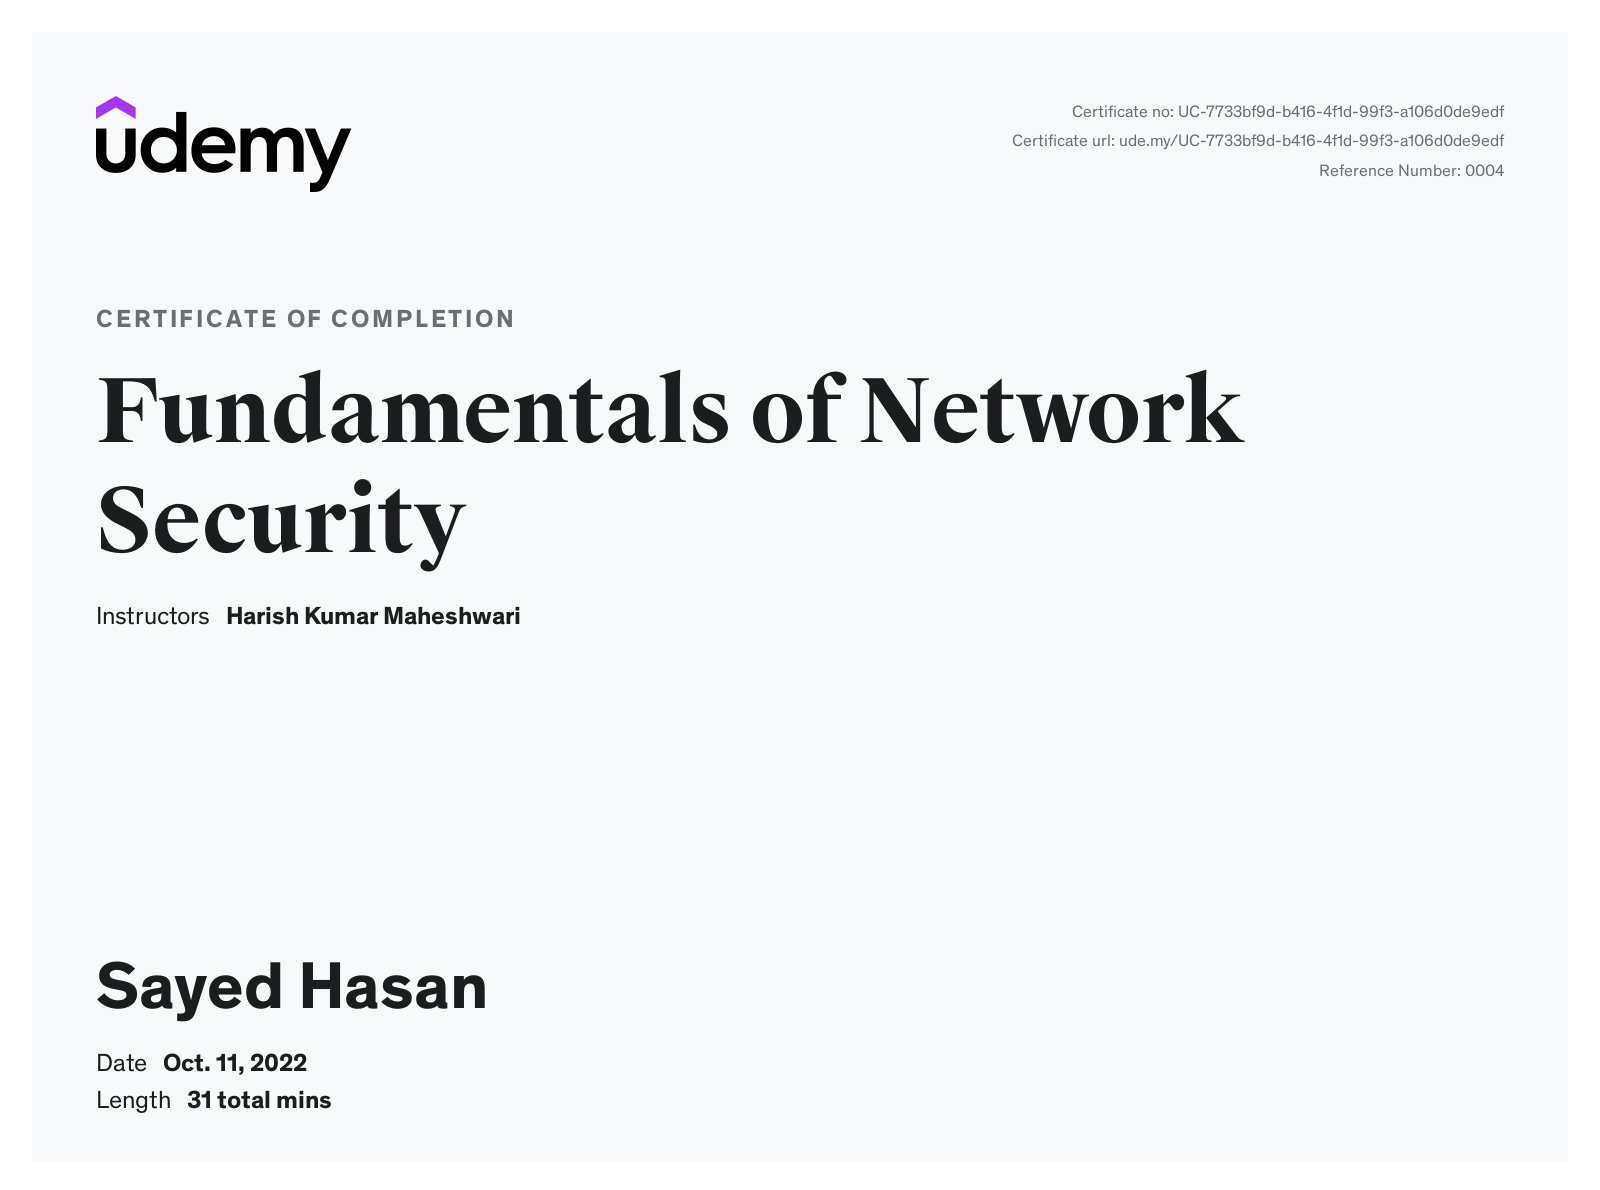 Sayed's certificate of network security